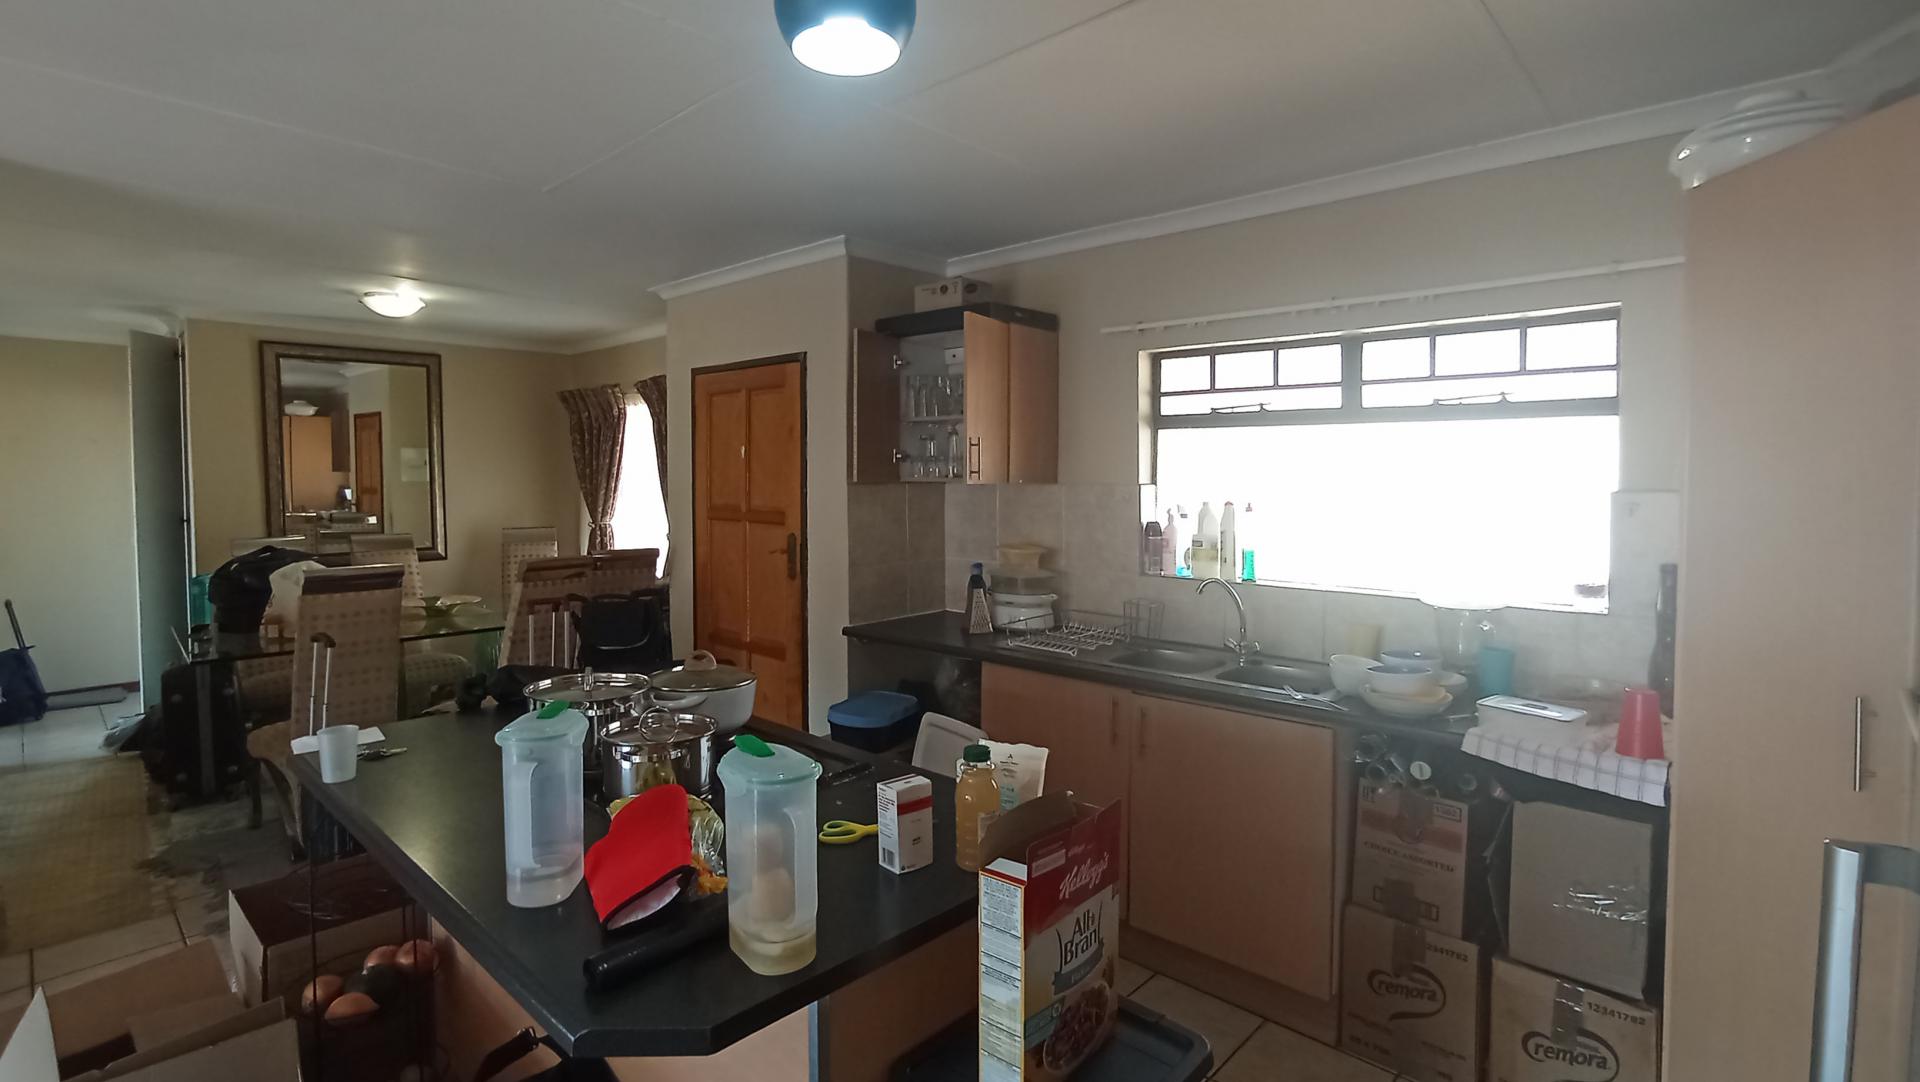 Kitchen - 11 square meters of property in Erand Gardens